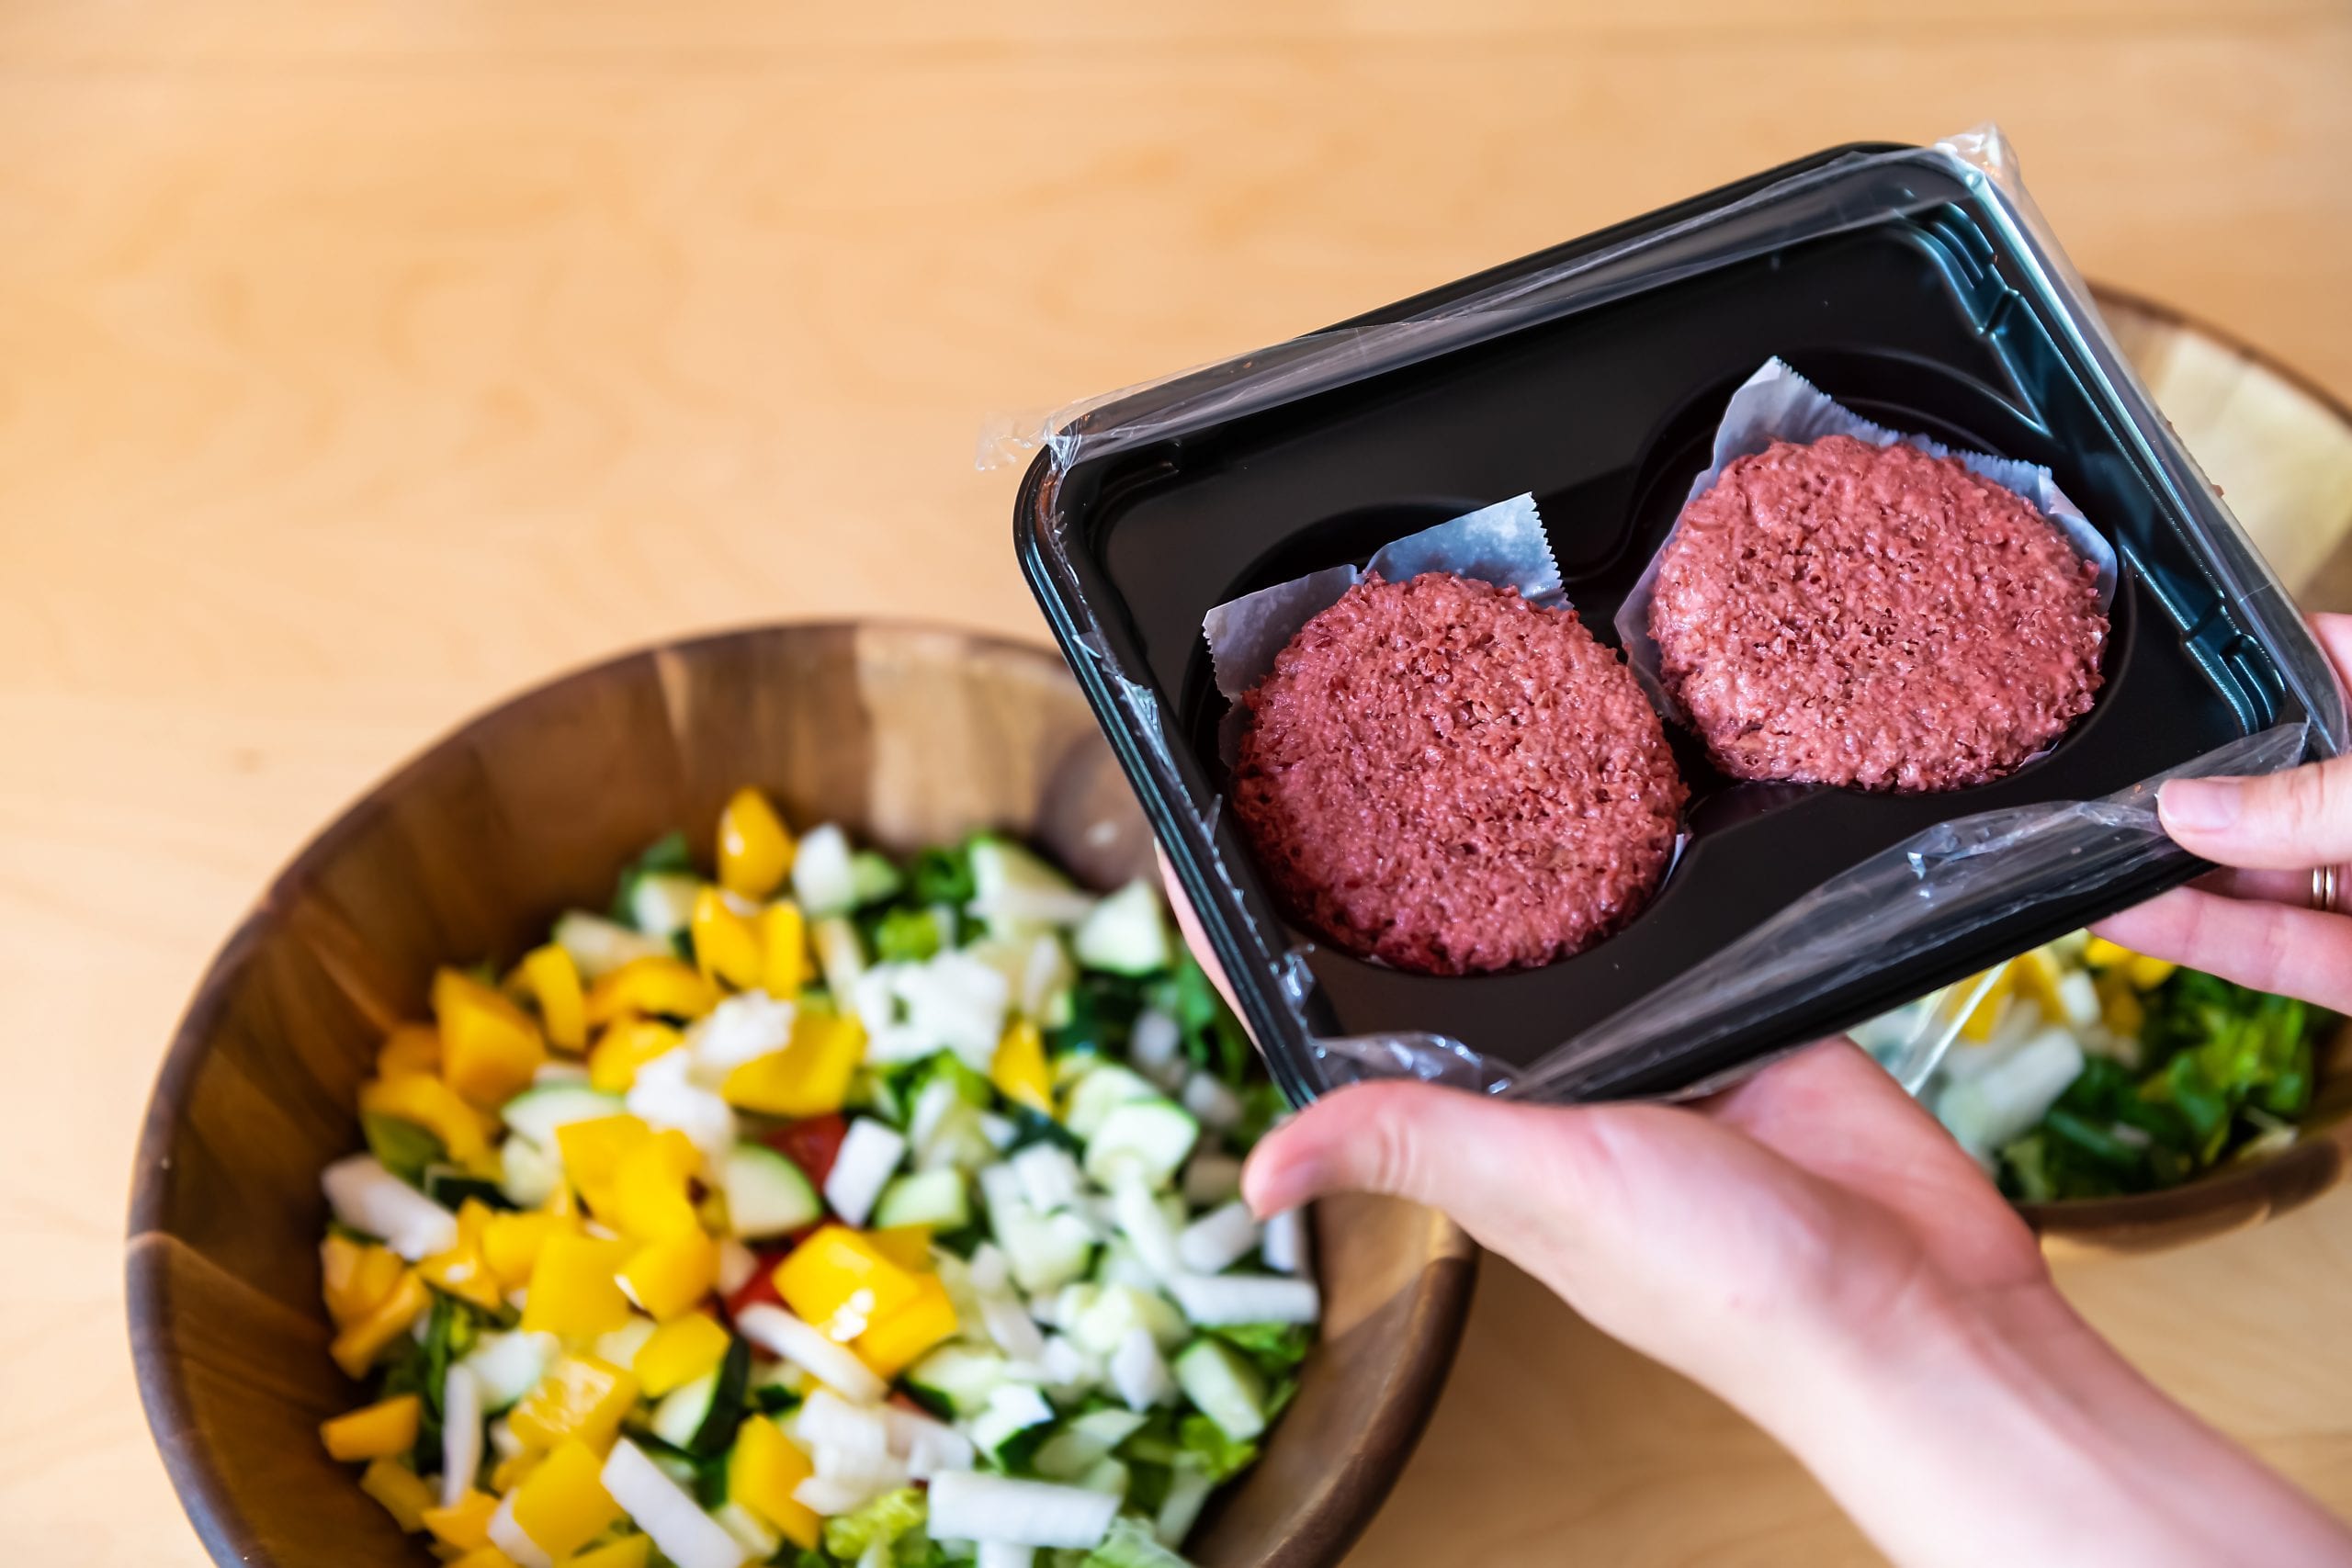 Woman holding two raw uncooked red vegan meat burger patties by salad bowls in packaging